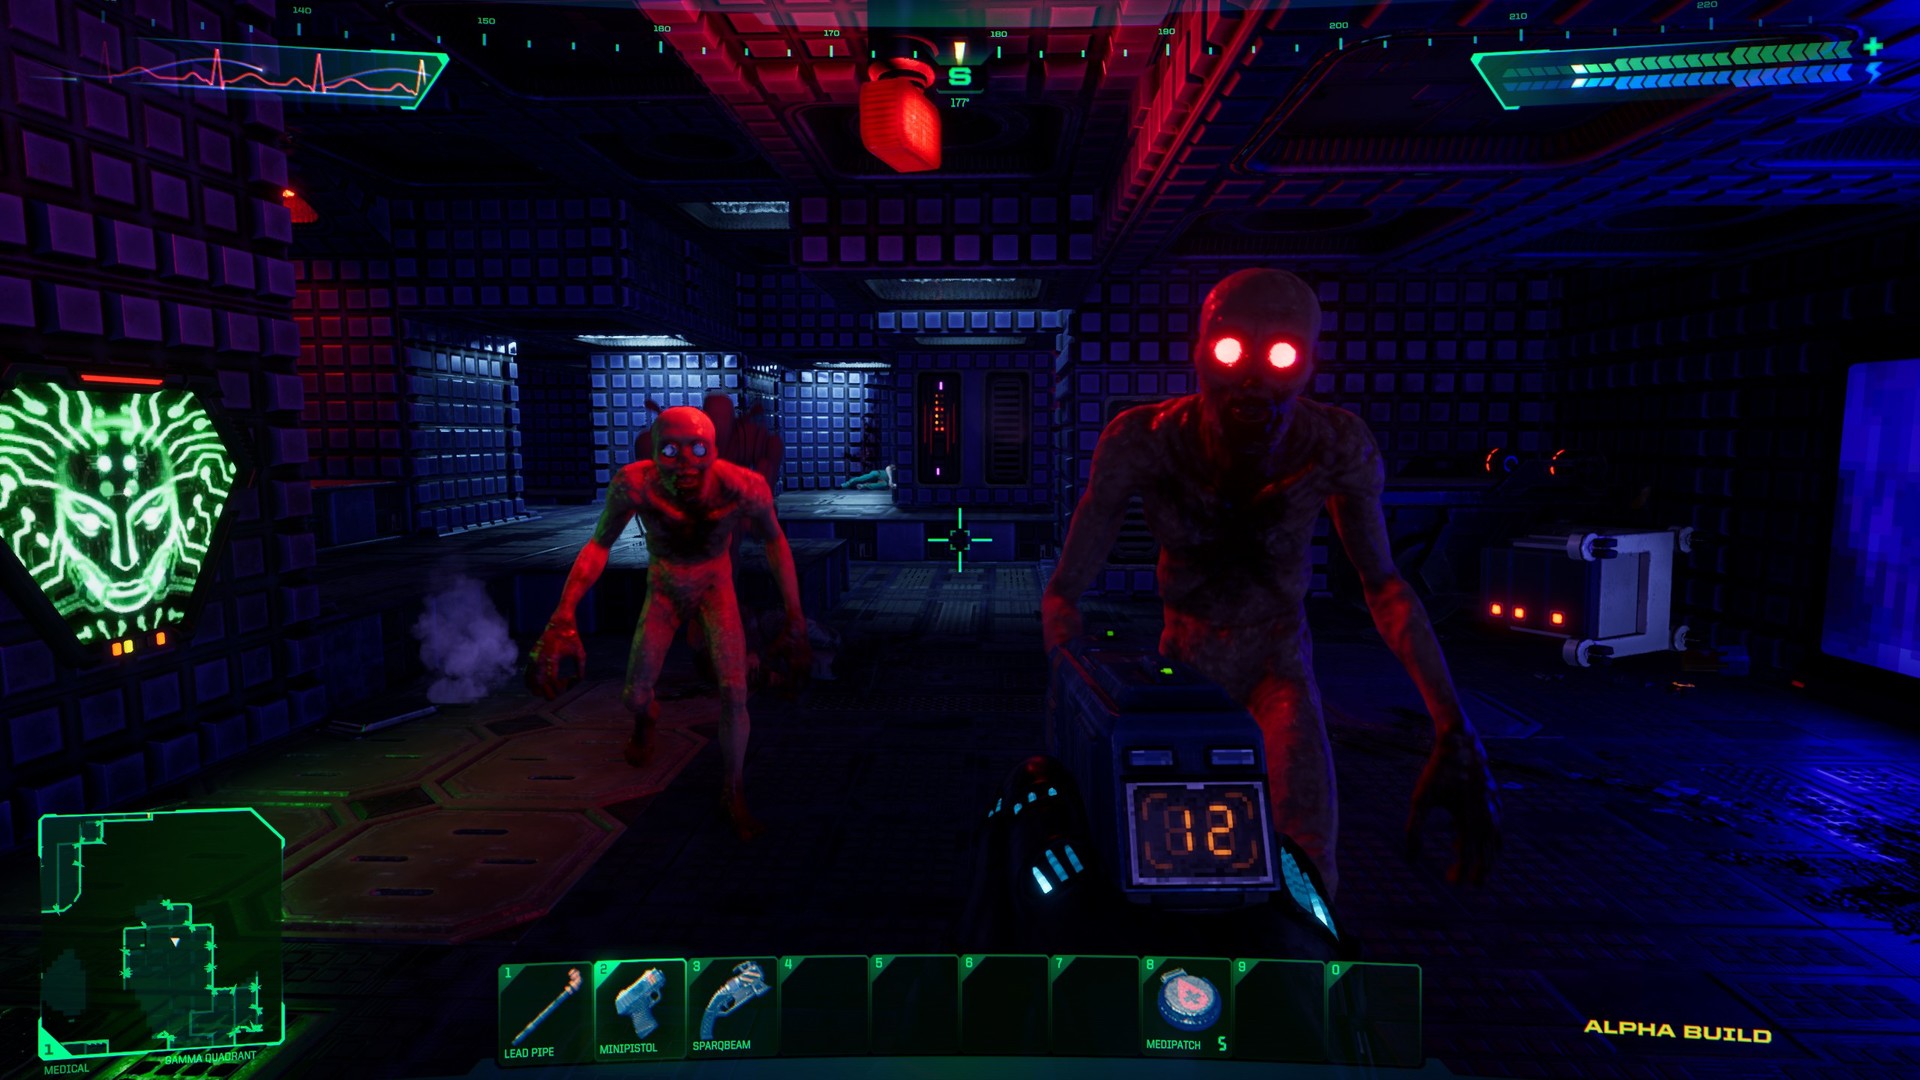 System Shock Remake Set for Late Summer PC Release, New Playable Demo Available